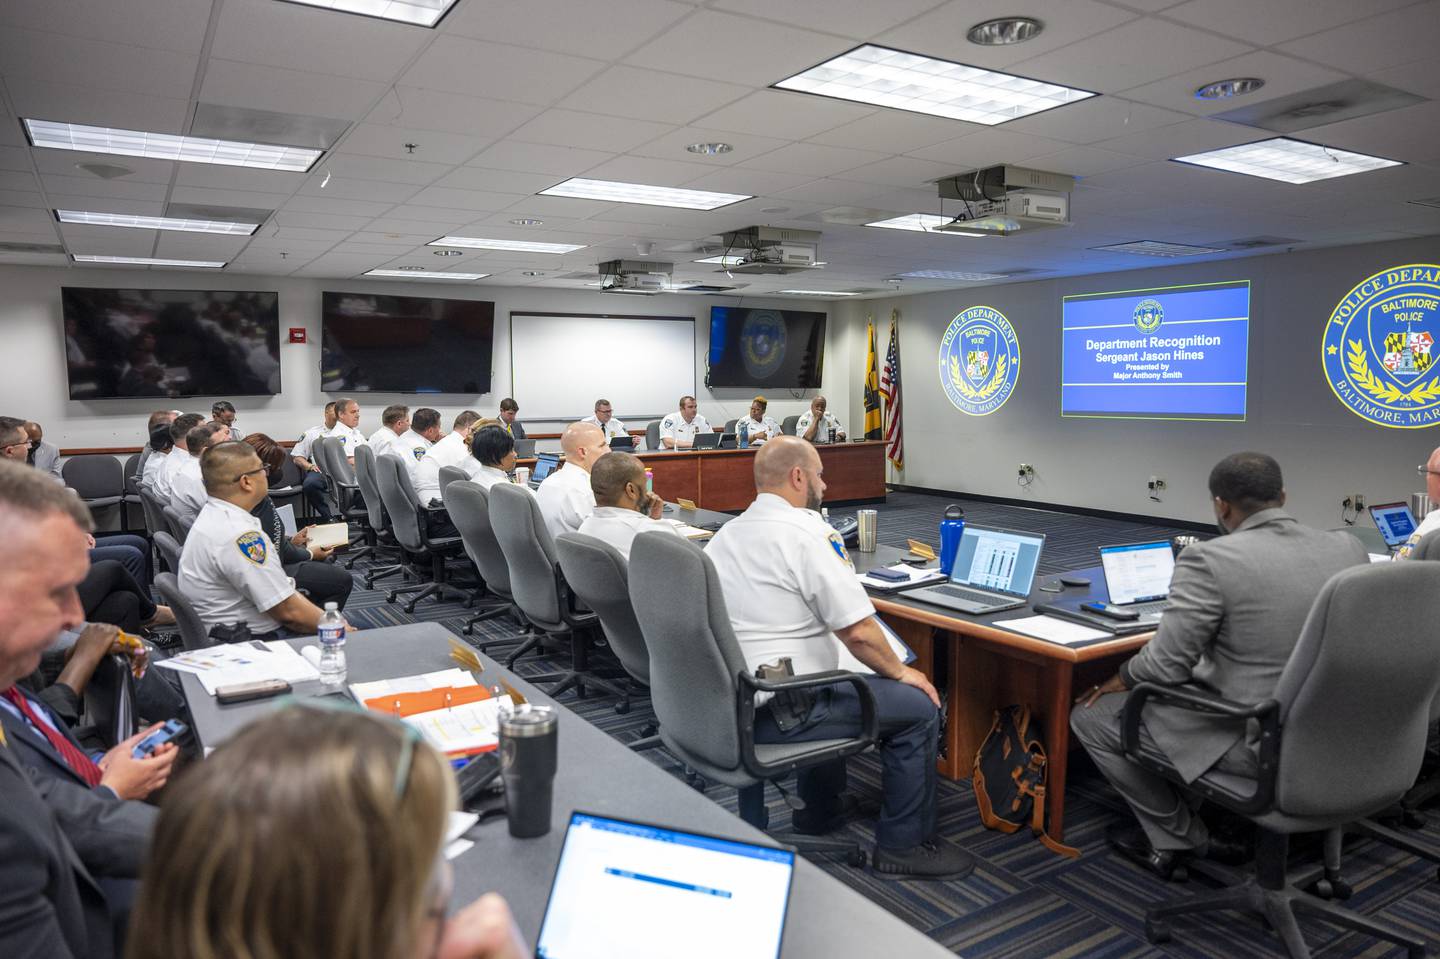 Comstat.  Commanders gather every Thursday for a meeting called Comstat, where they go over data and trends. The meeting in the past was described as a brow-beating session heavy on intelligence - now, the department emphasizes process and procedure.